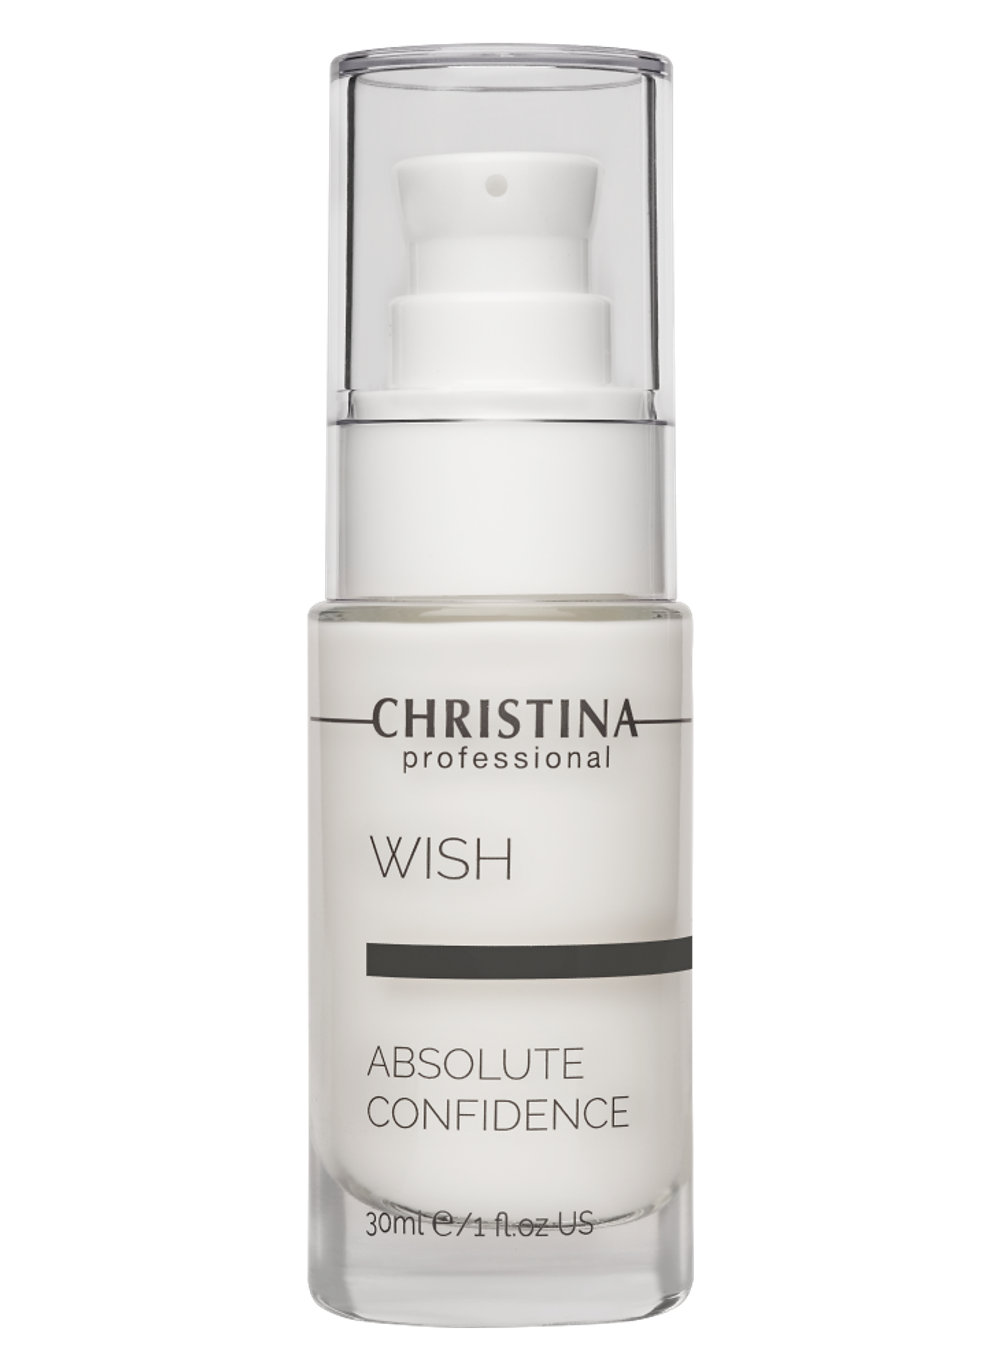 CHRISTINA Wish Absolute Confidence Expression Wrinkle Reduction